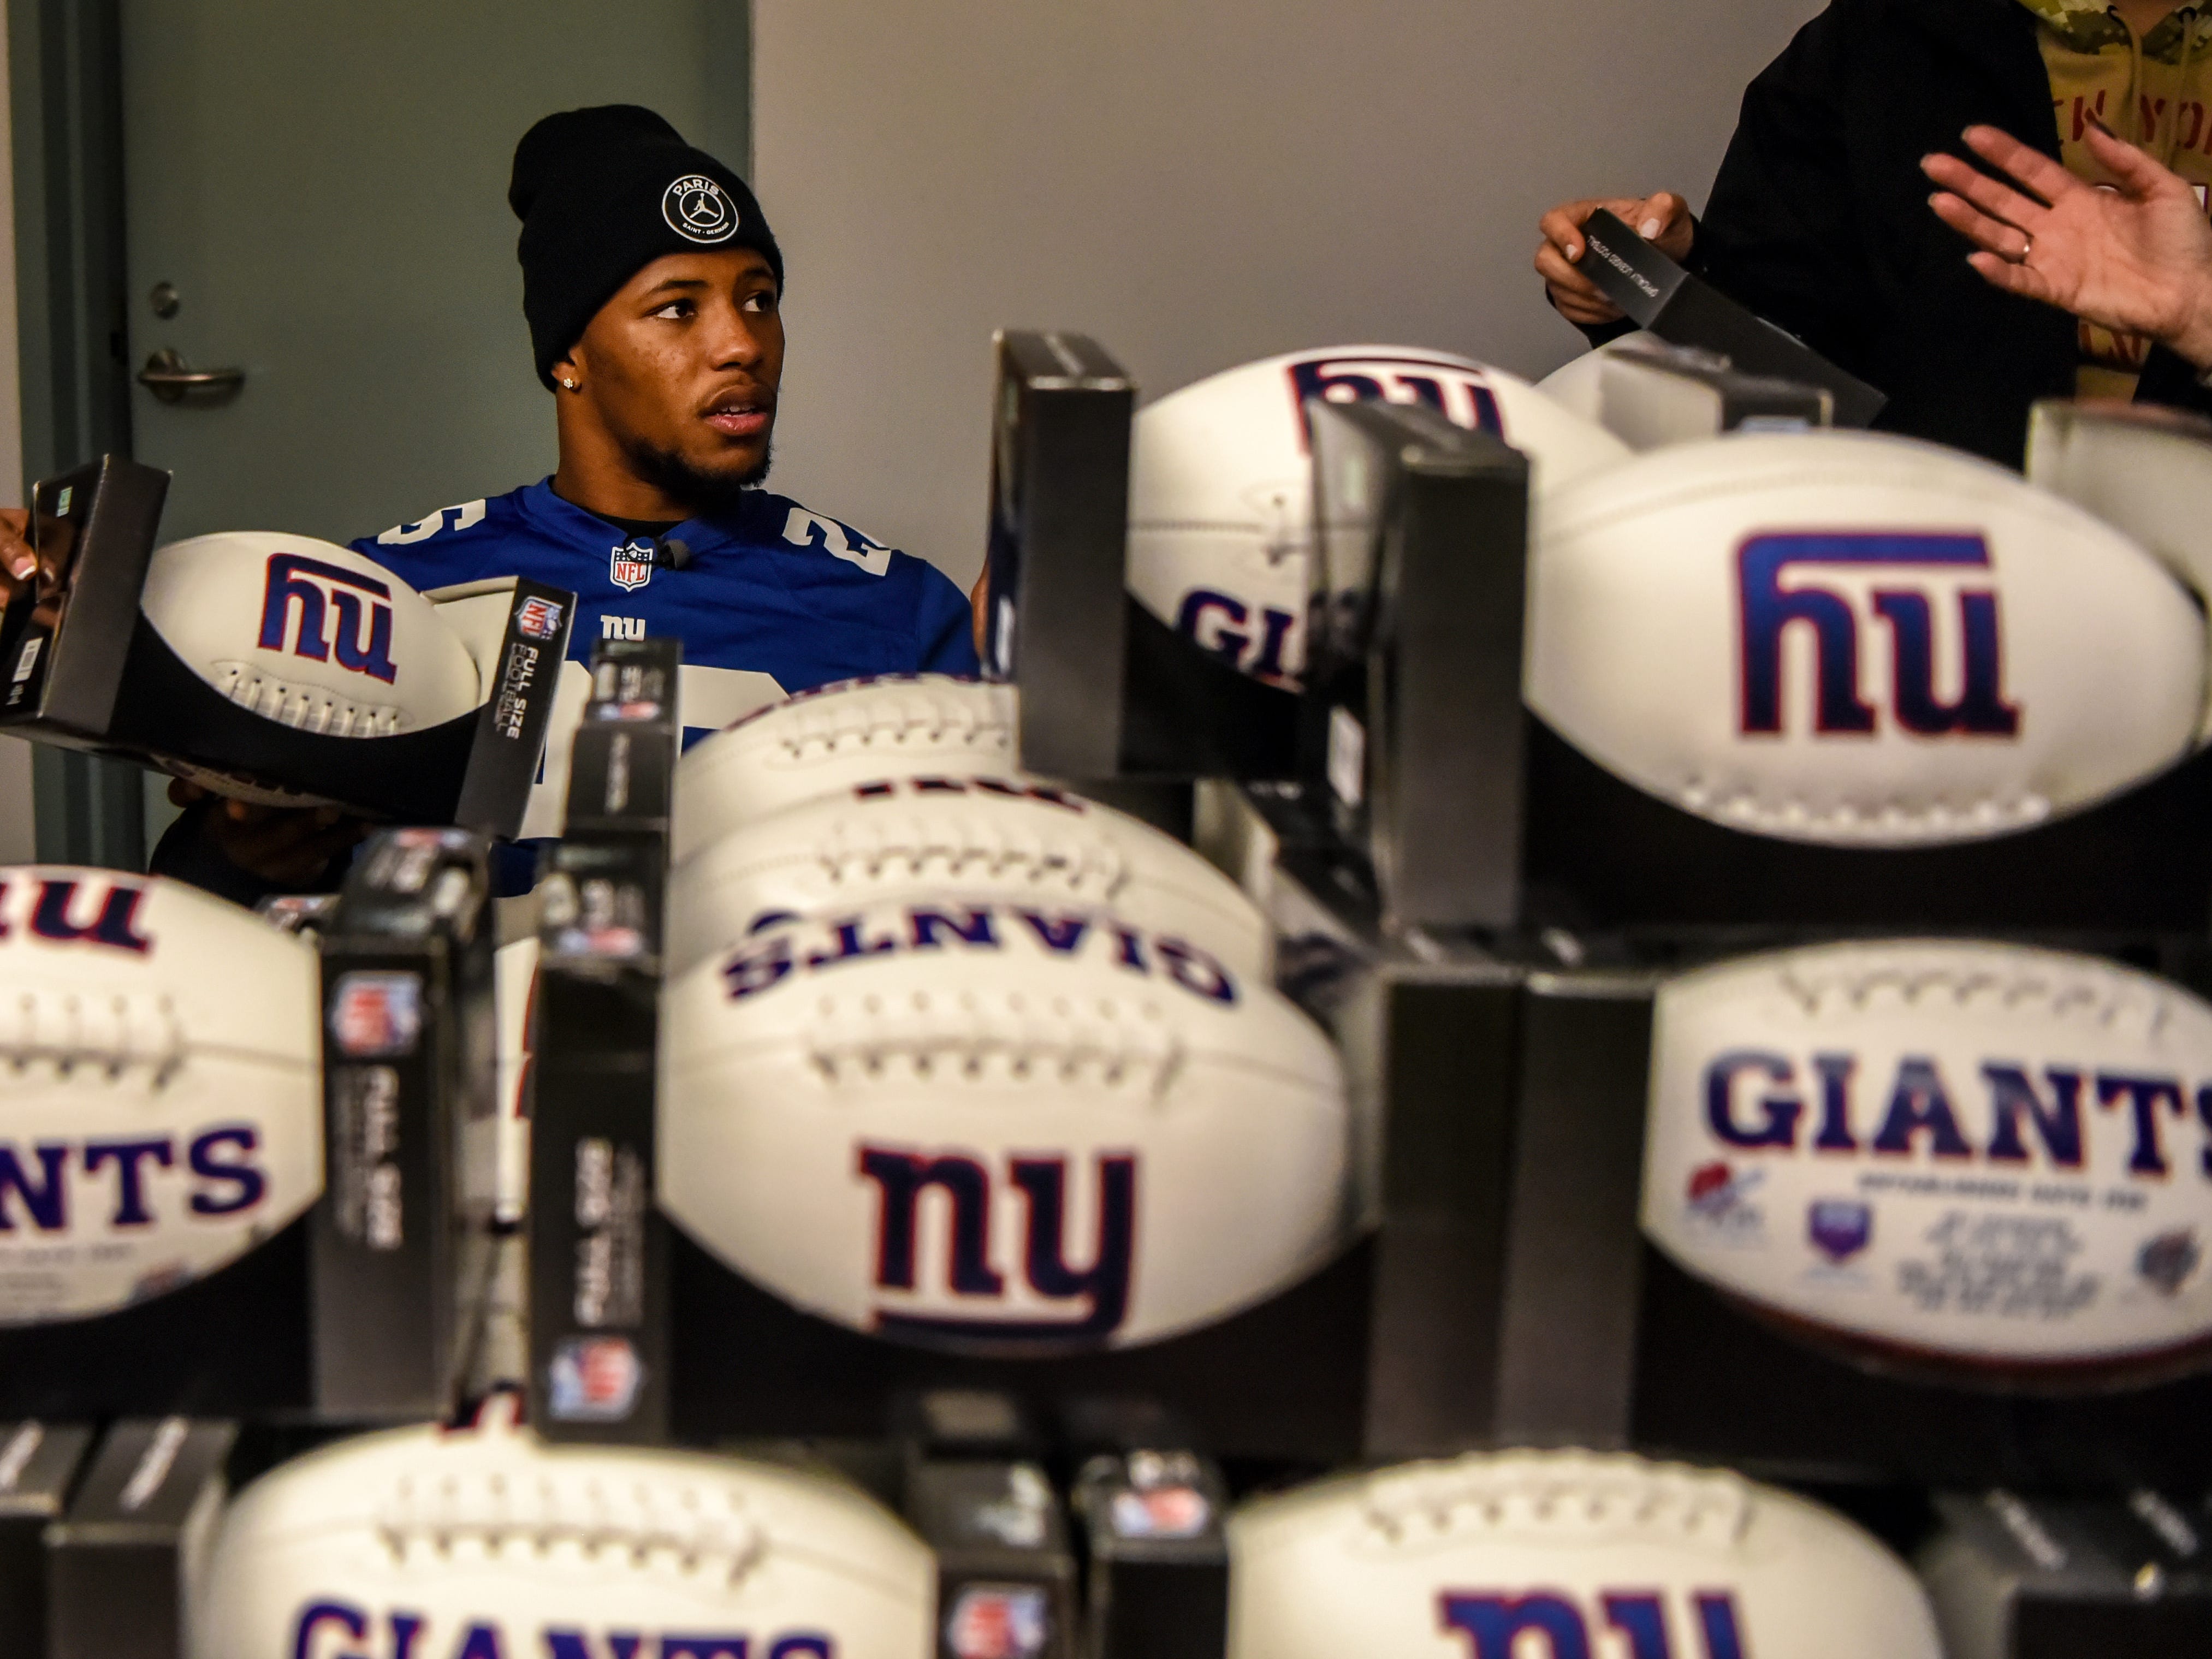 Covenant House holds a Sleep Out Executive Edition in Newark on Thursday November 21, 2019. Saquon Barkley from the Giants and Sleep Out: Executive Edition Chairman, sits behind a wall of Giants branded footballs that he signs for people at the Sleep Out. 